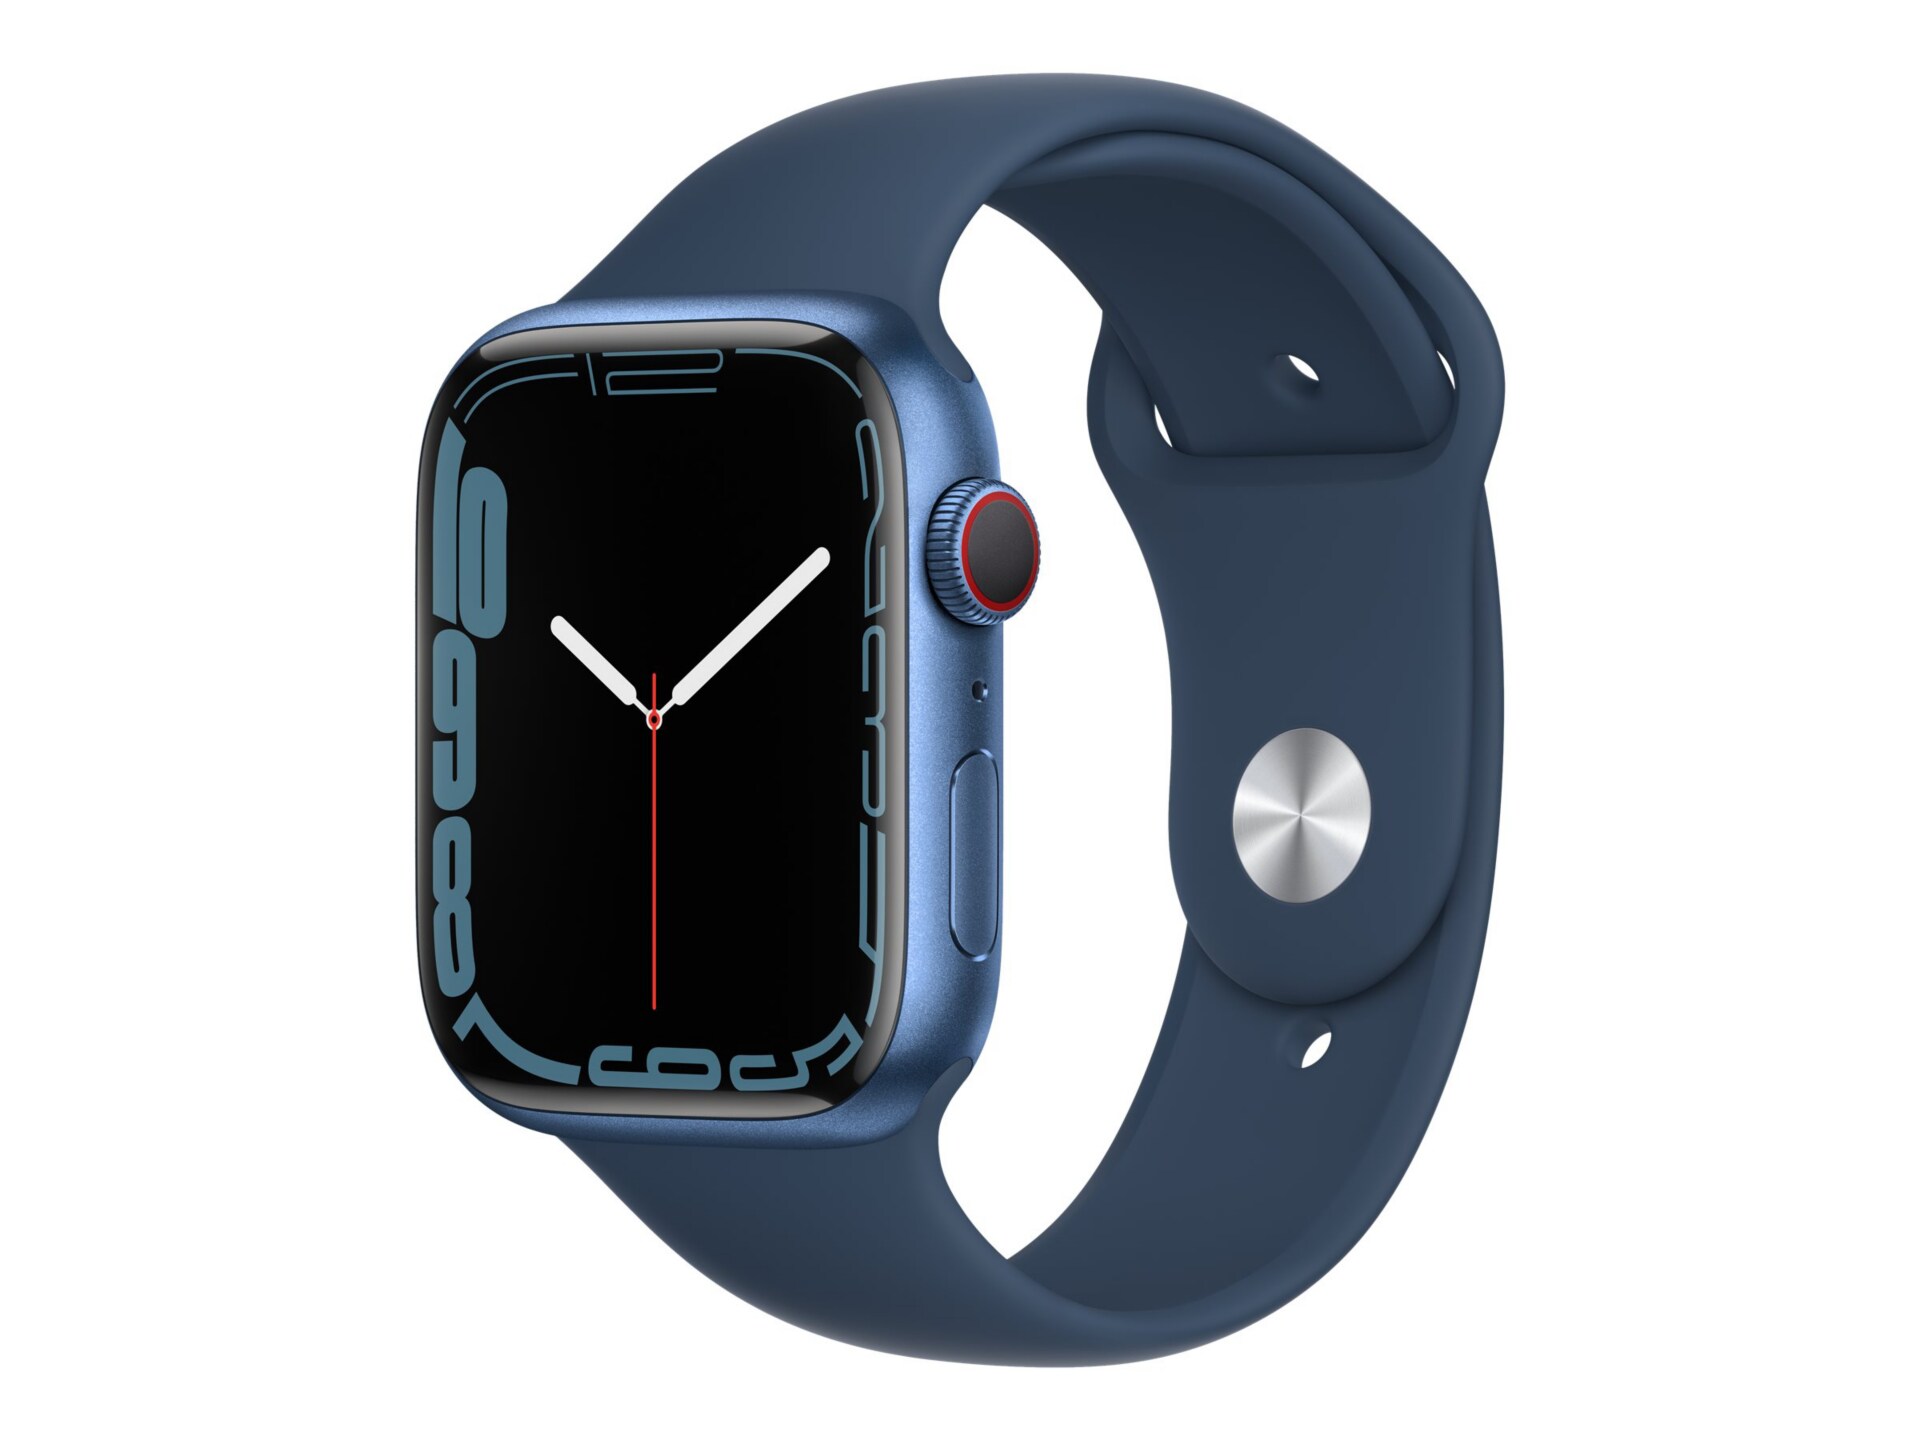 Apple Watch Series 7 (GPS + Cellular) - blue aluminum - smart watch with sport band - abyss blue - 32 GB